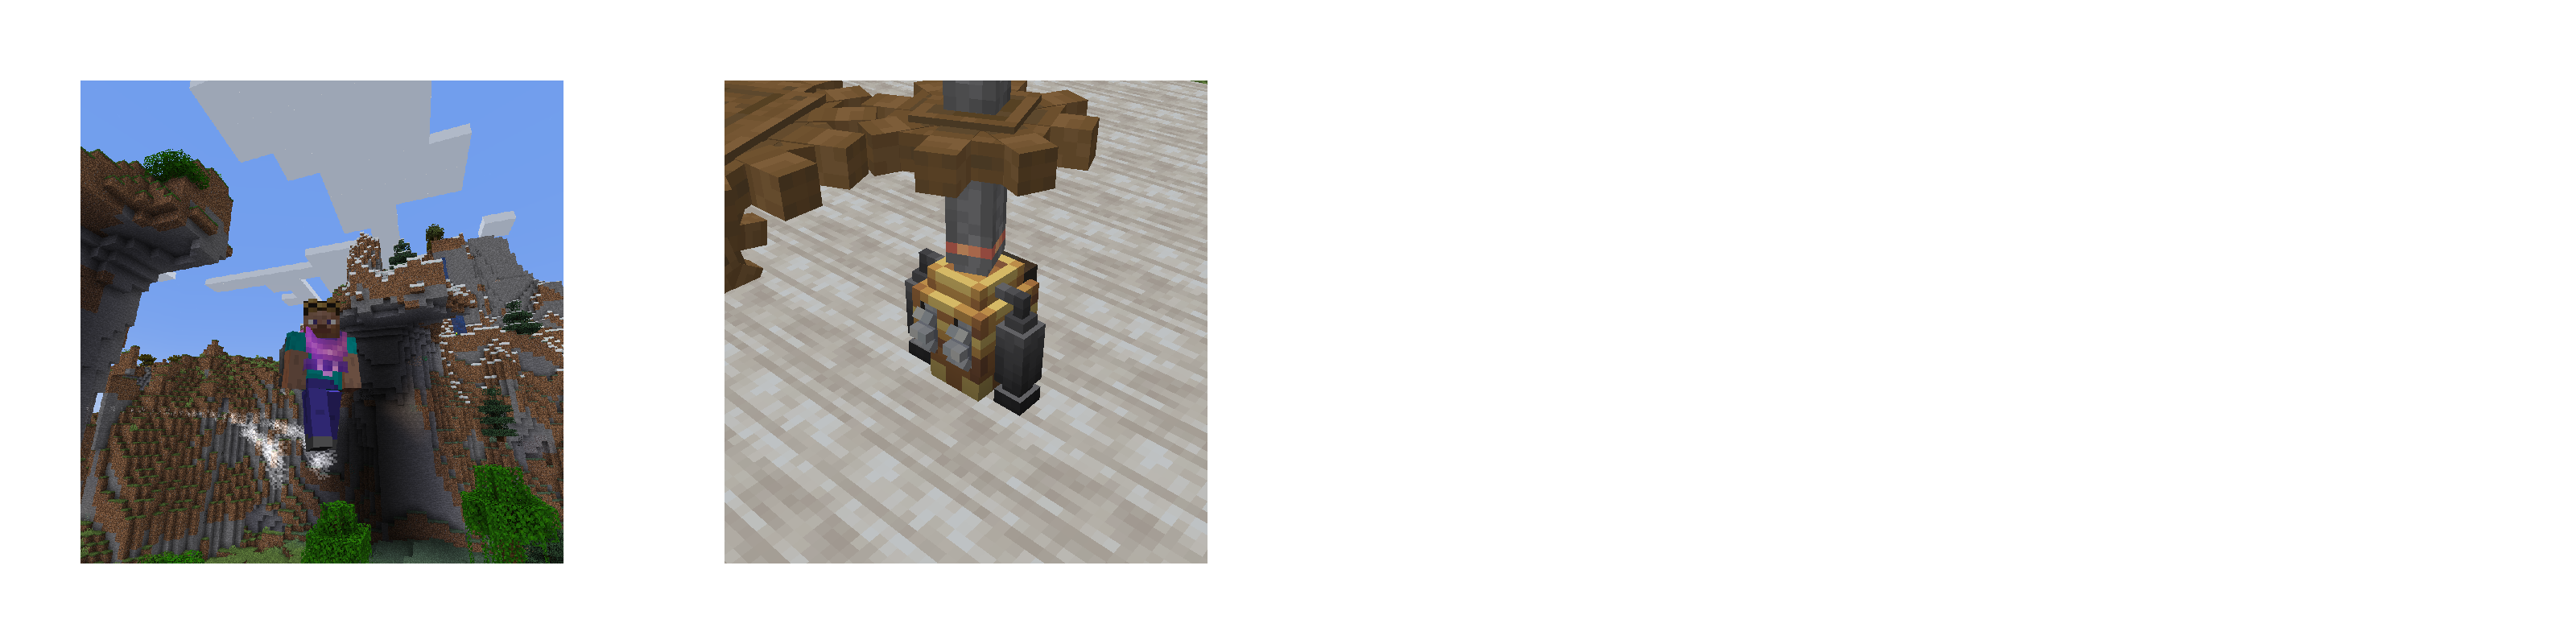 They added Jetpacks to the Create Mod! 